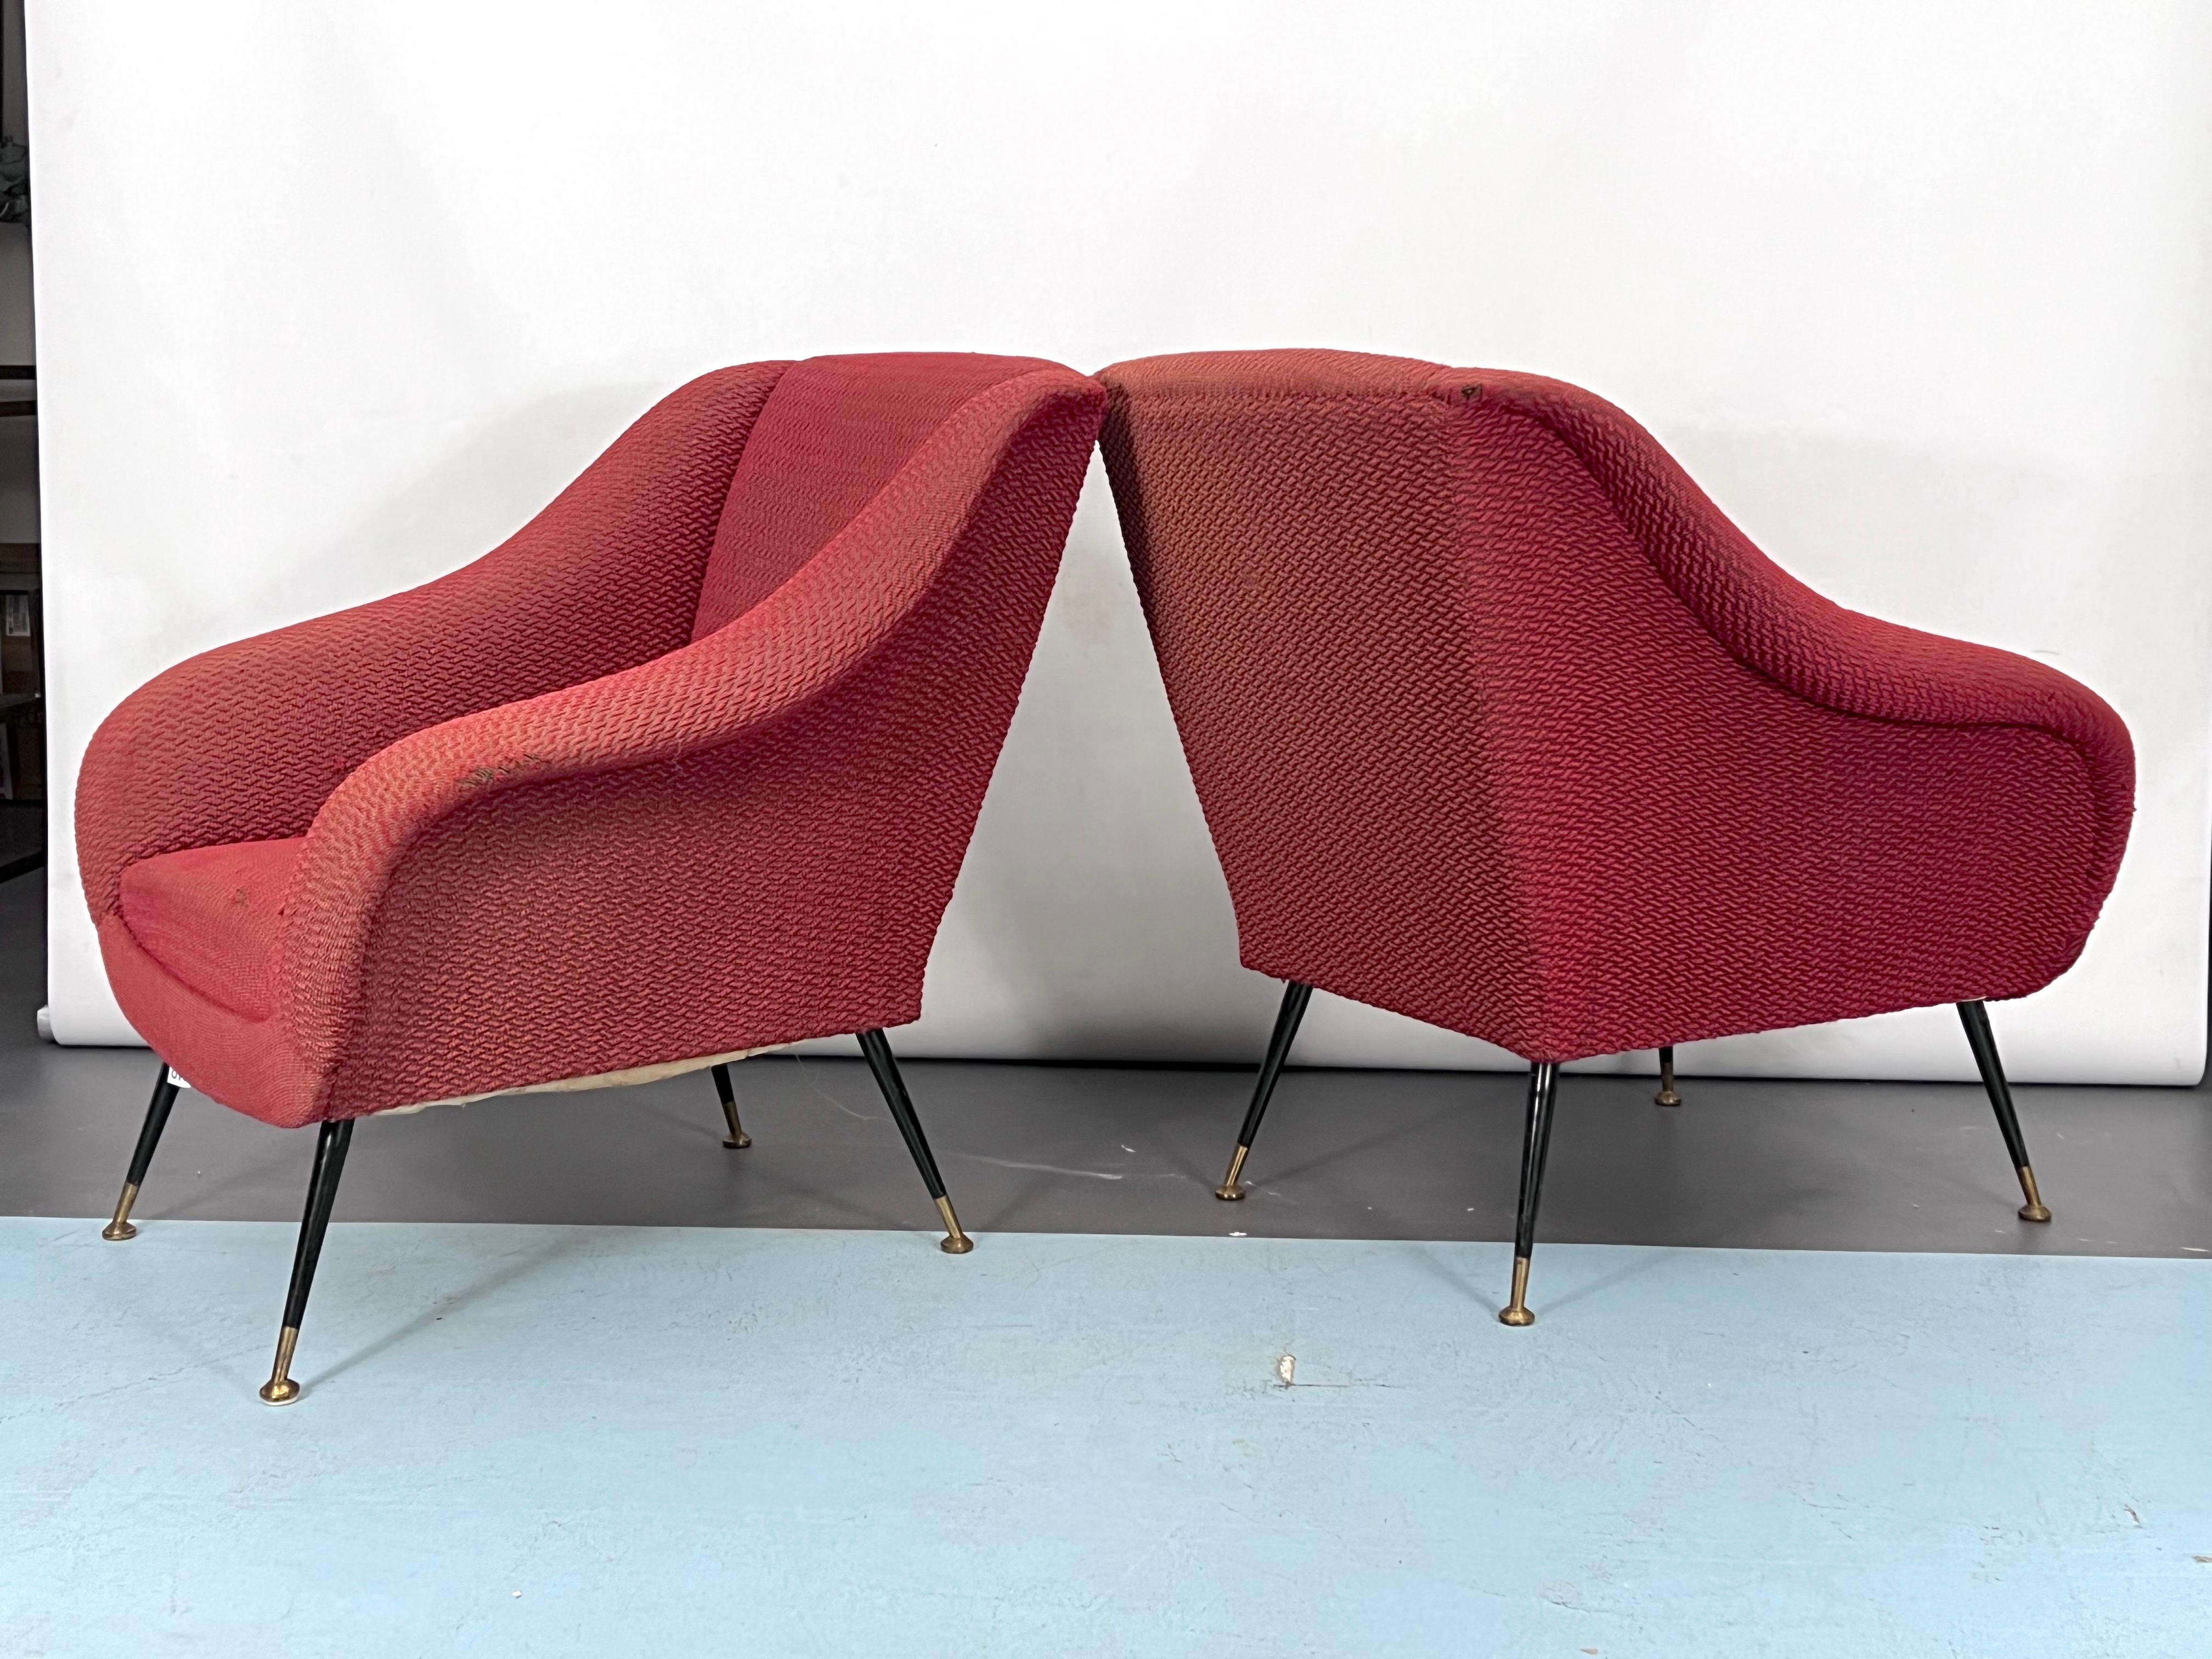 20th Century Mid-Century Pair of Lounge Chairs by Gigi Radice for Minotti, Italy, 1950s For Sale